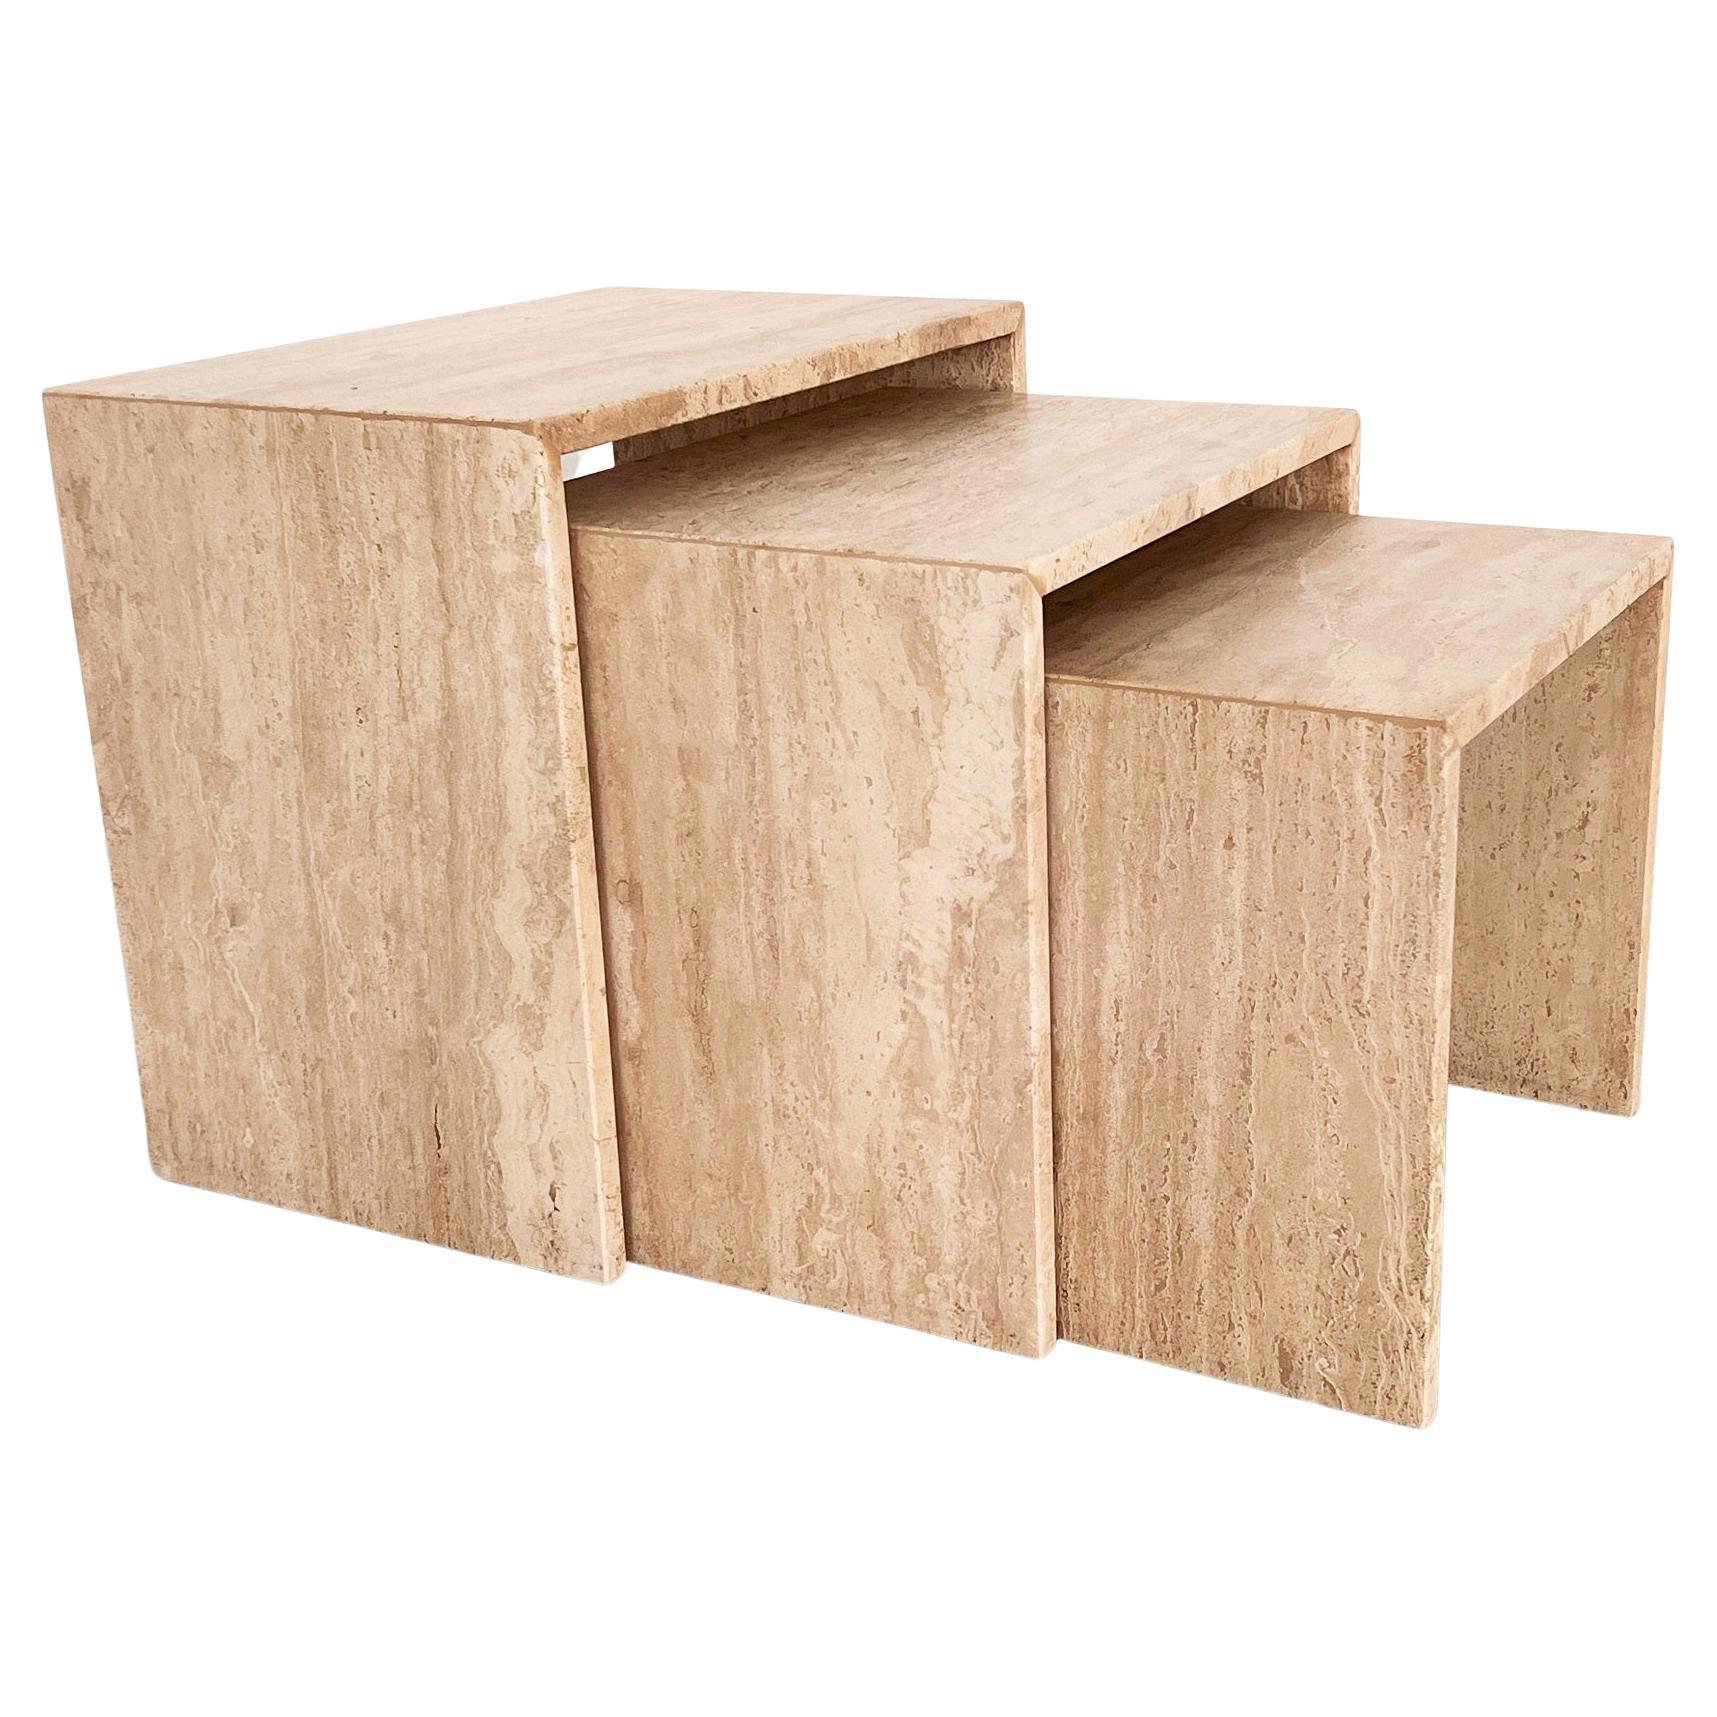 Nesting Coffee Tables in Travertine Stone from the 1970s, Set of Three For Sale